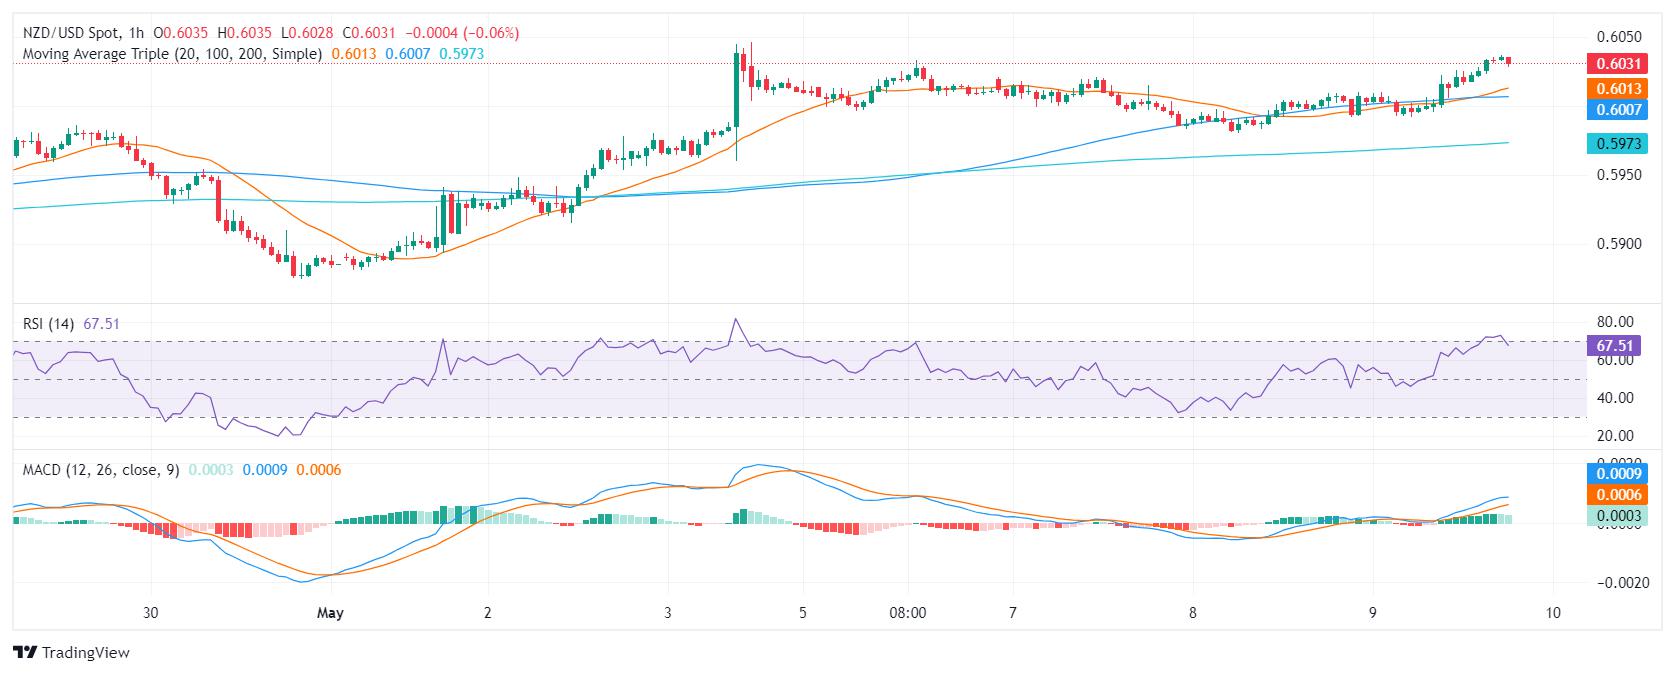 NZD/USD Price Analysis: Buyers gather momentum and challenge the 200-day SMA